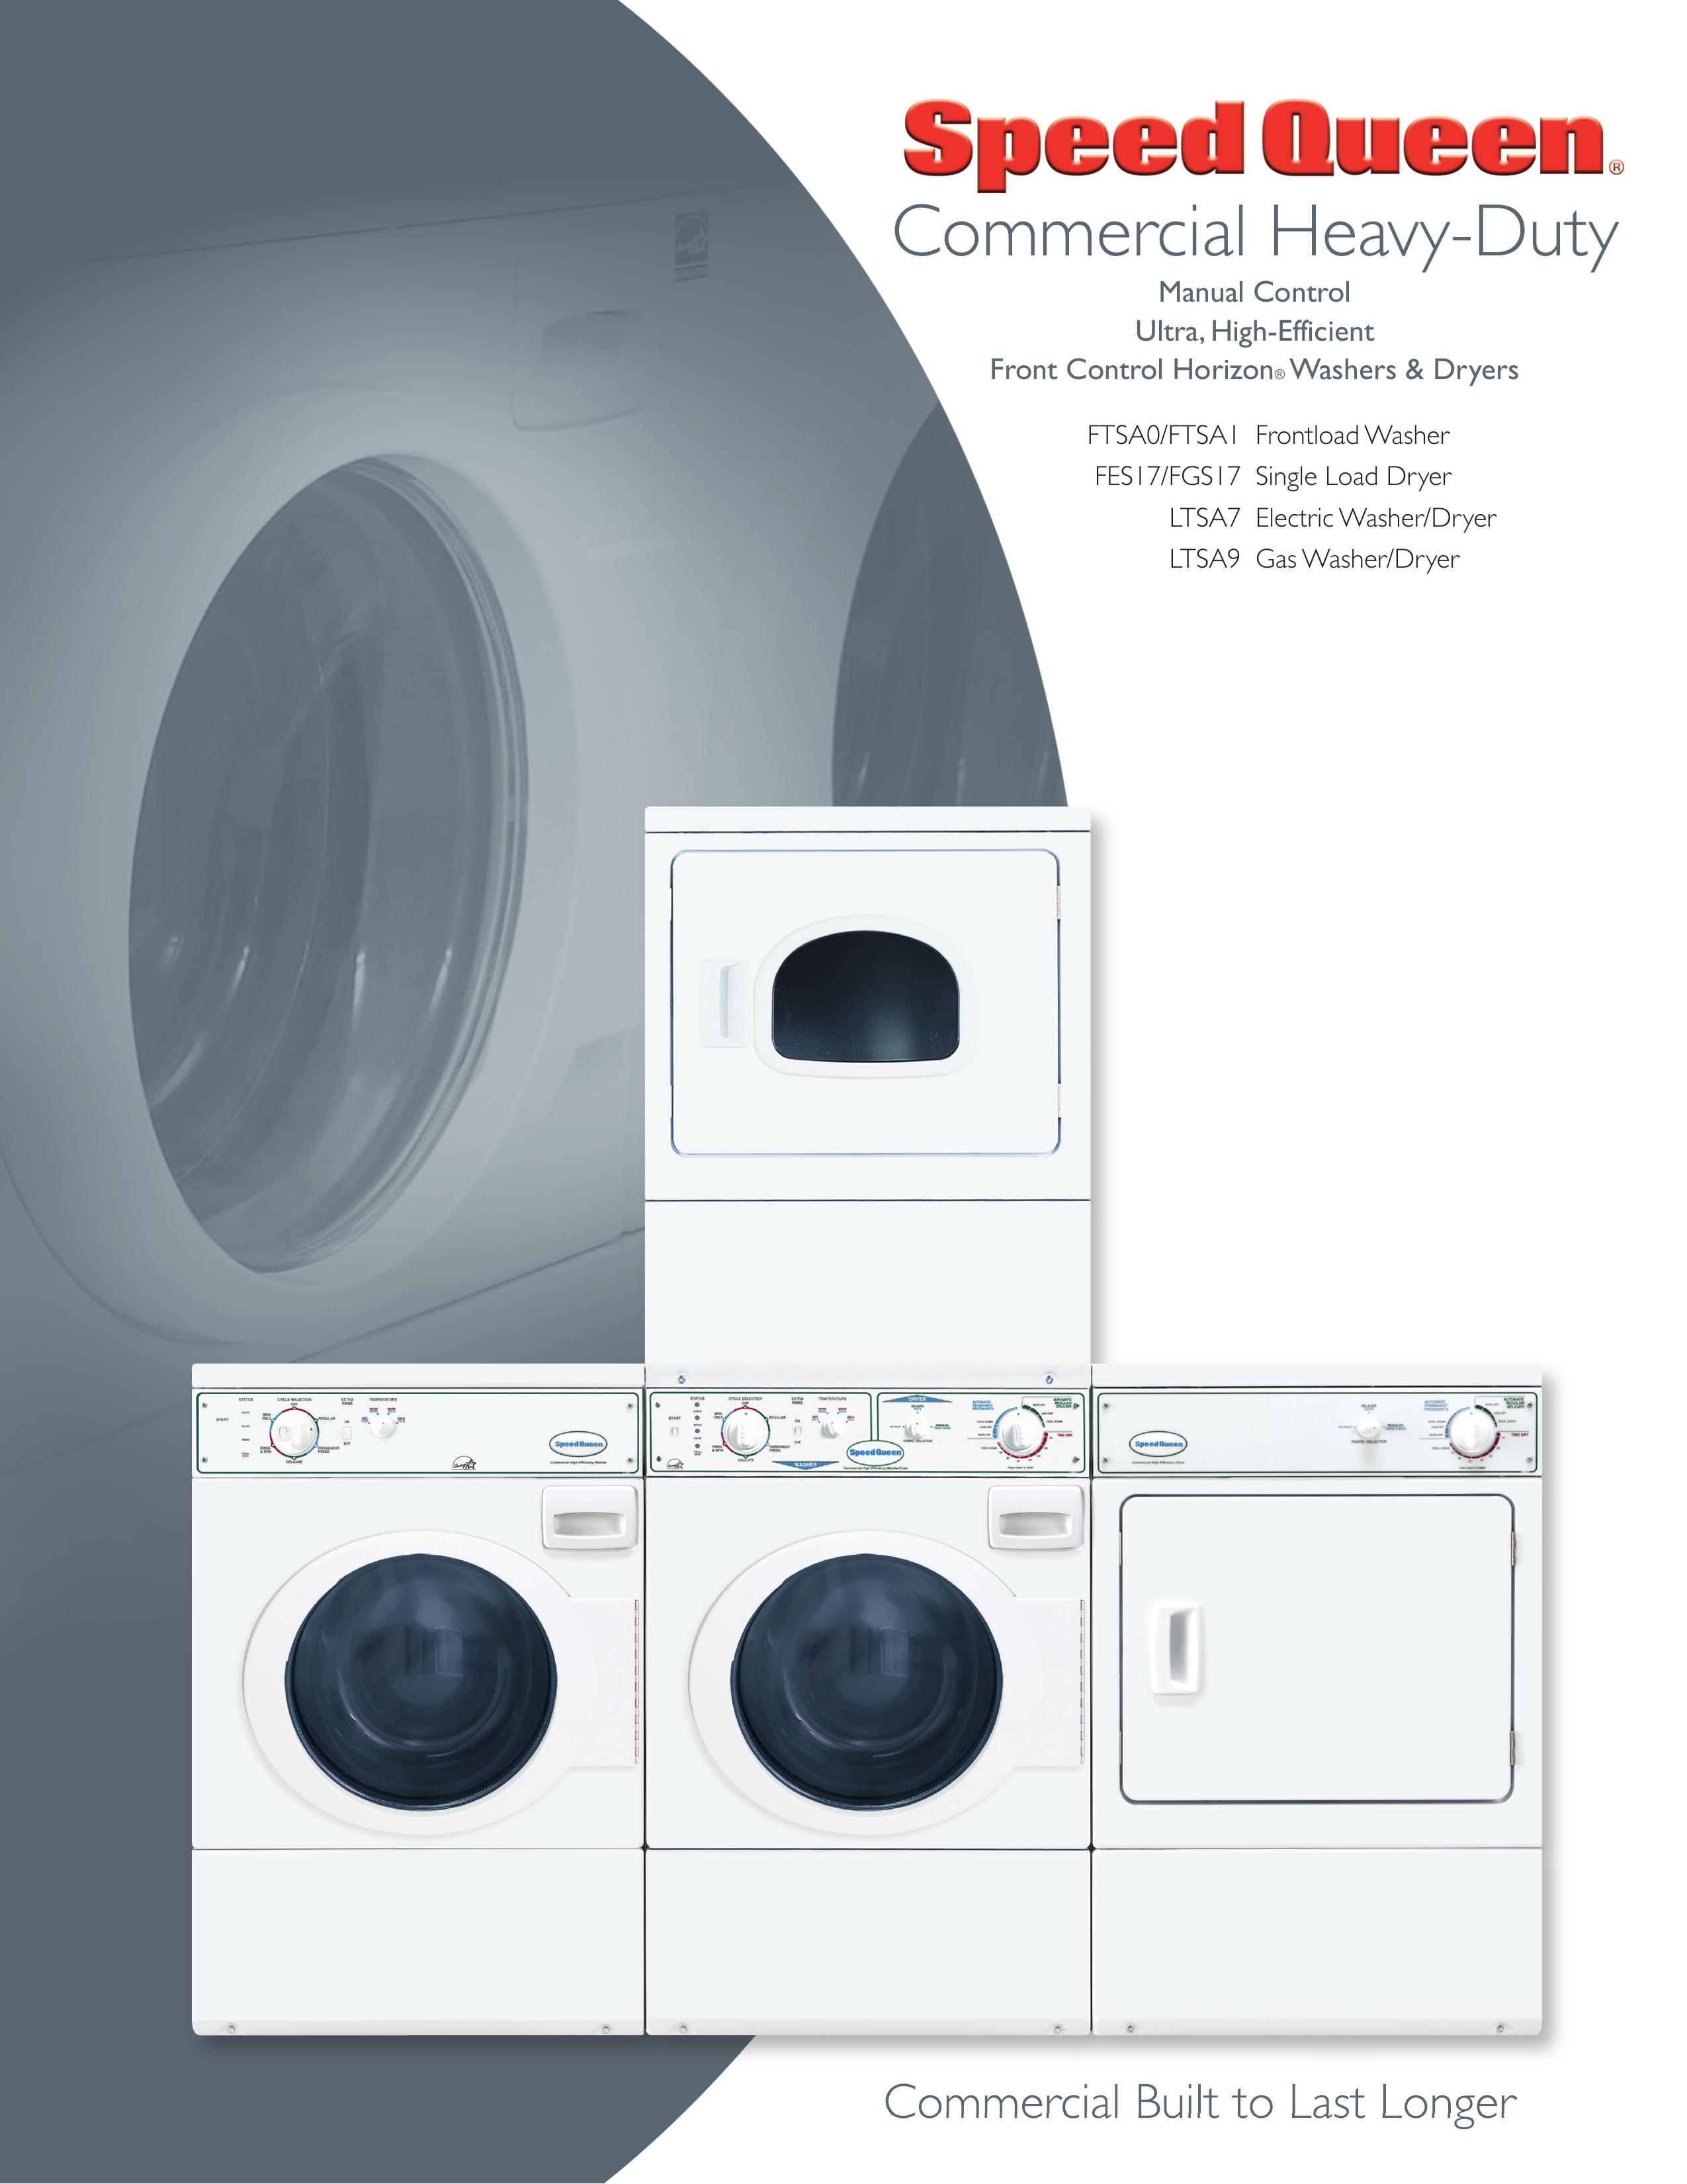 Speed Queen FGS17 Washer/Dryer User Manual